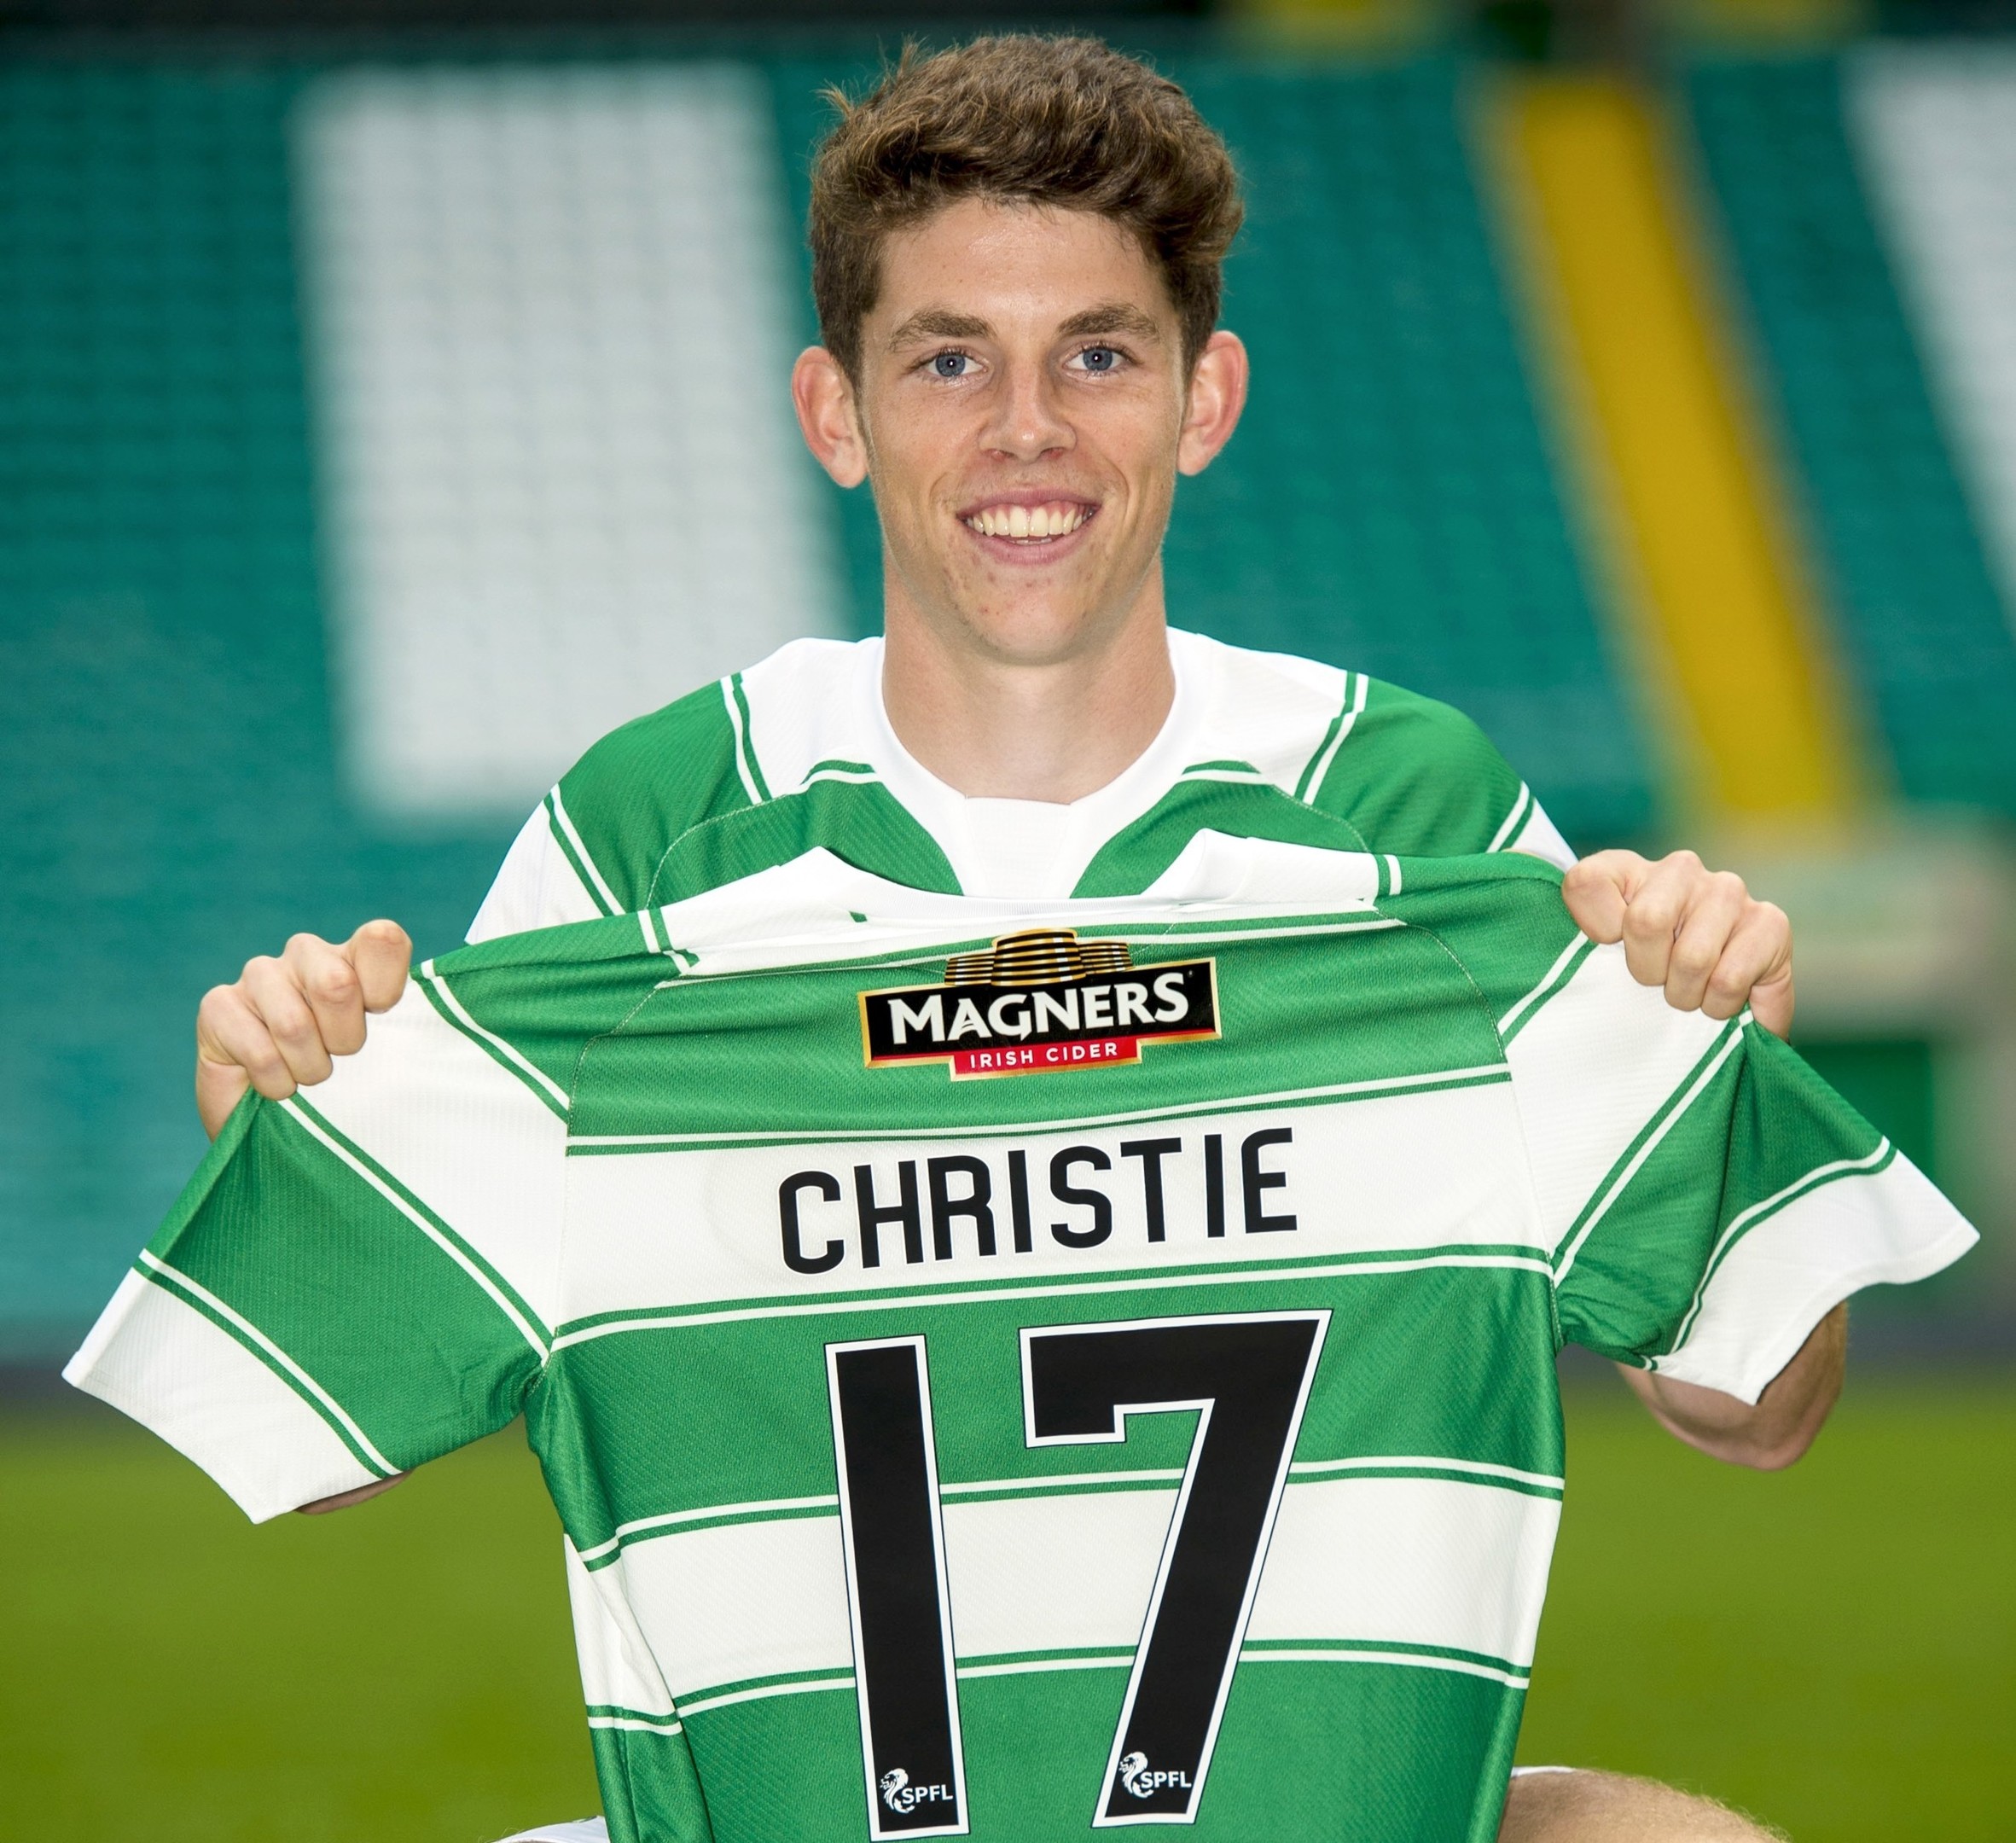 Christie joined Celtic near the end of the summer transfer window